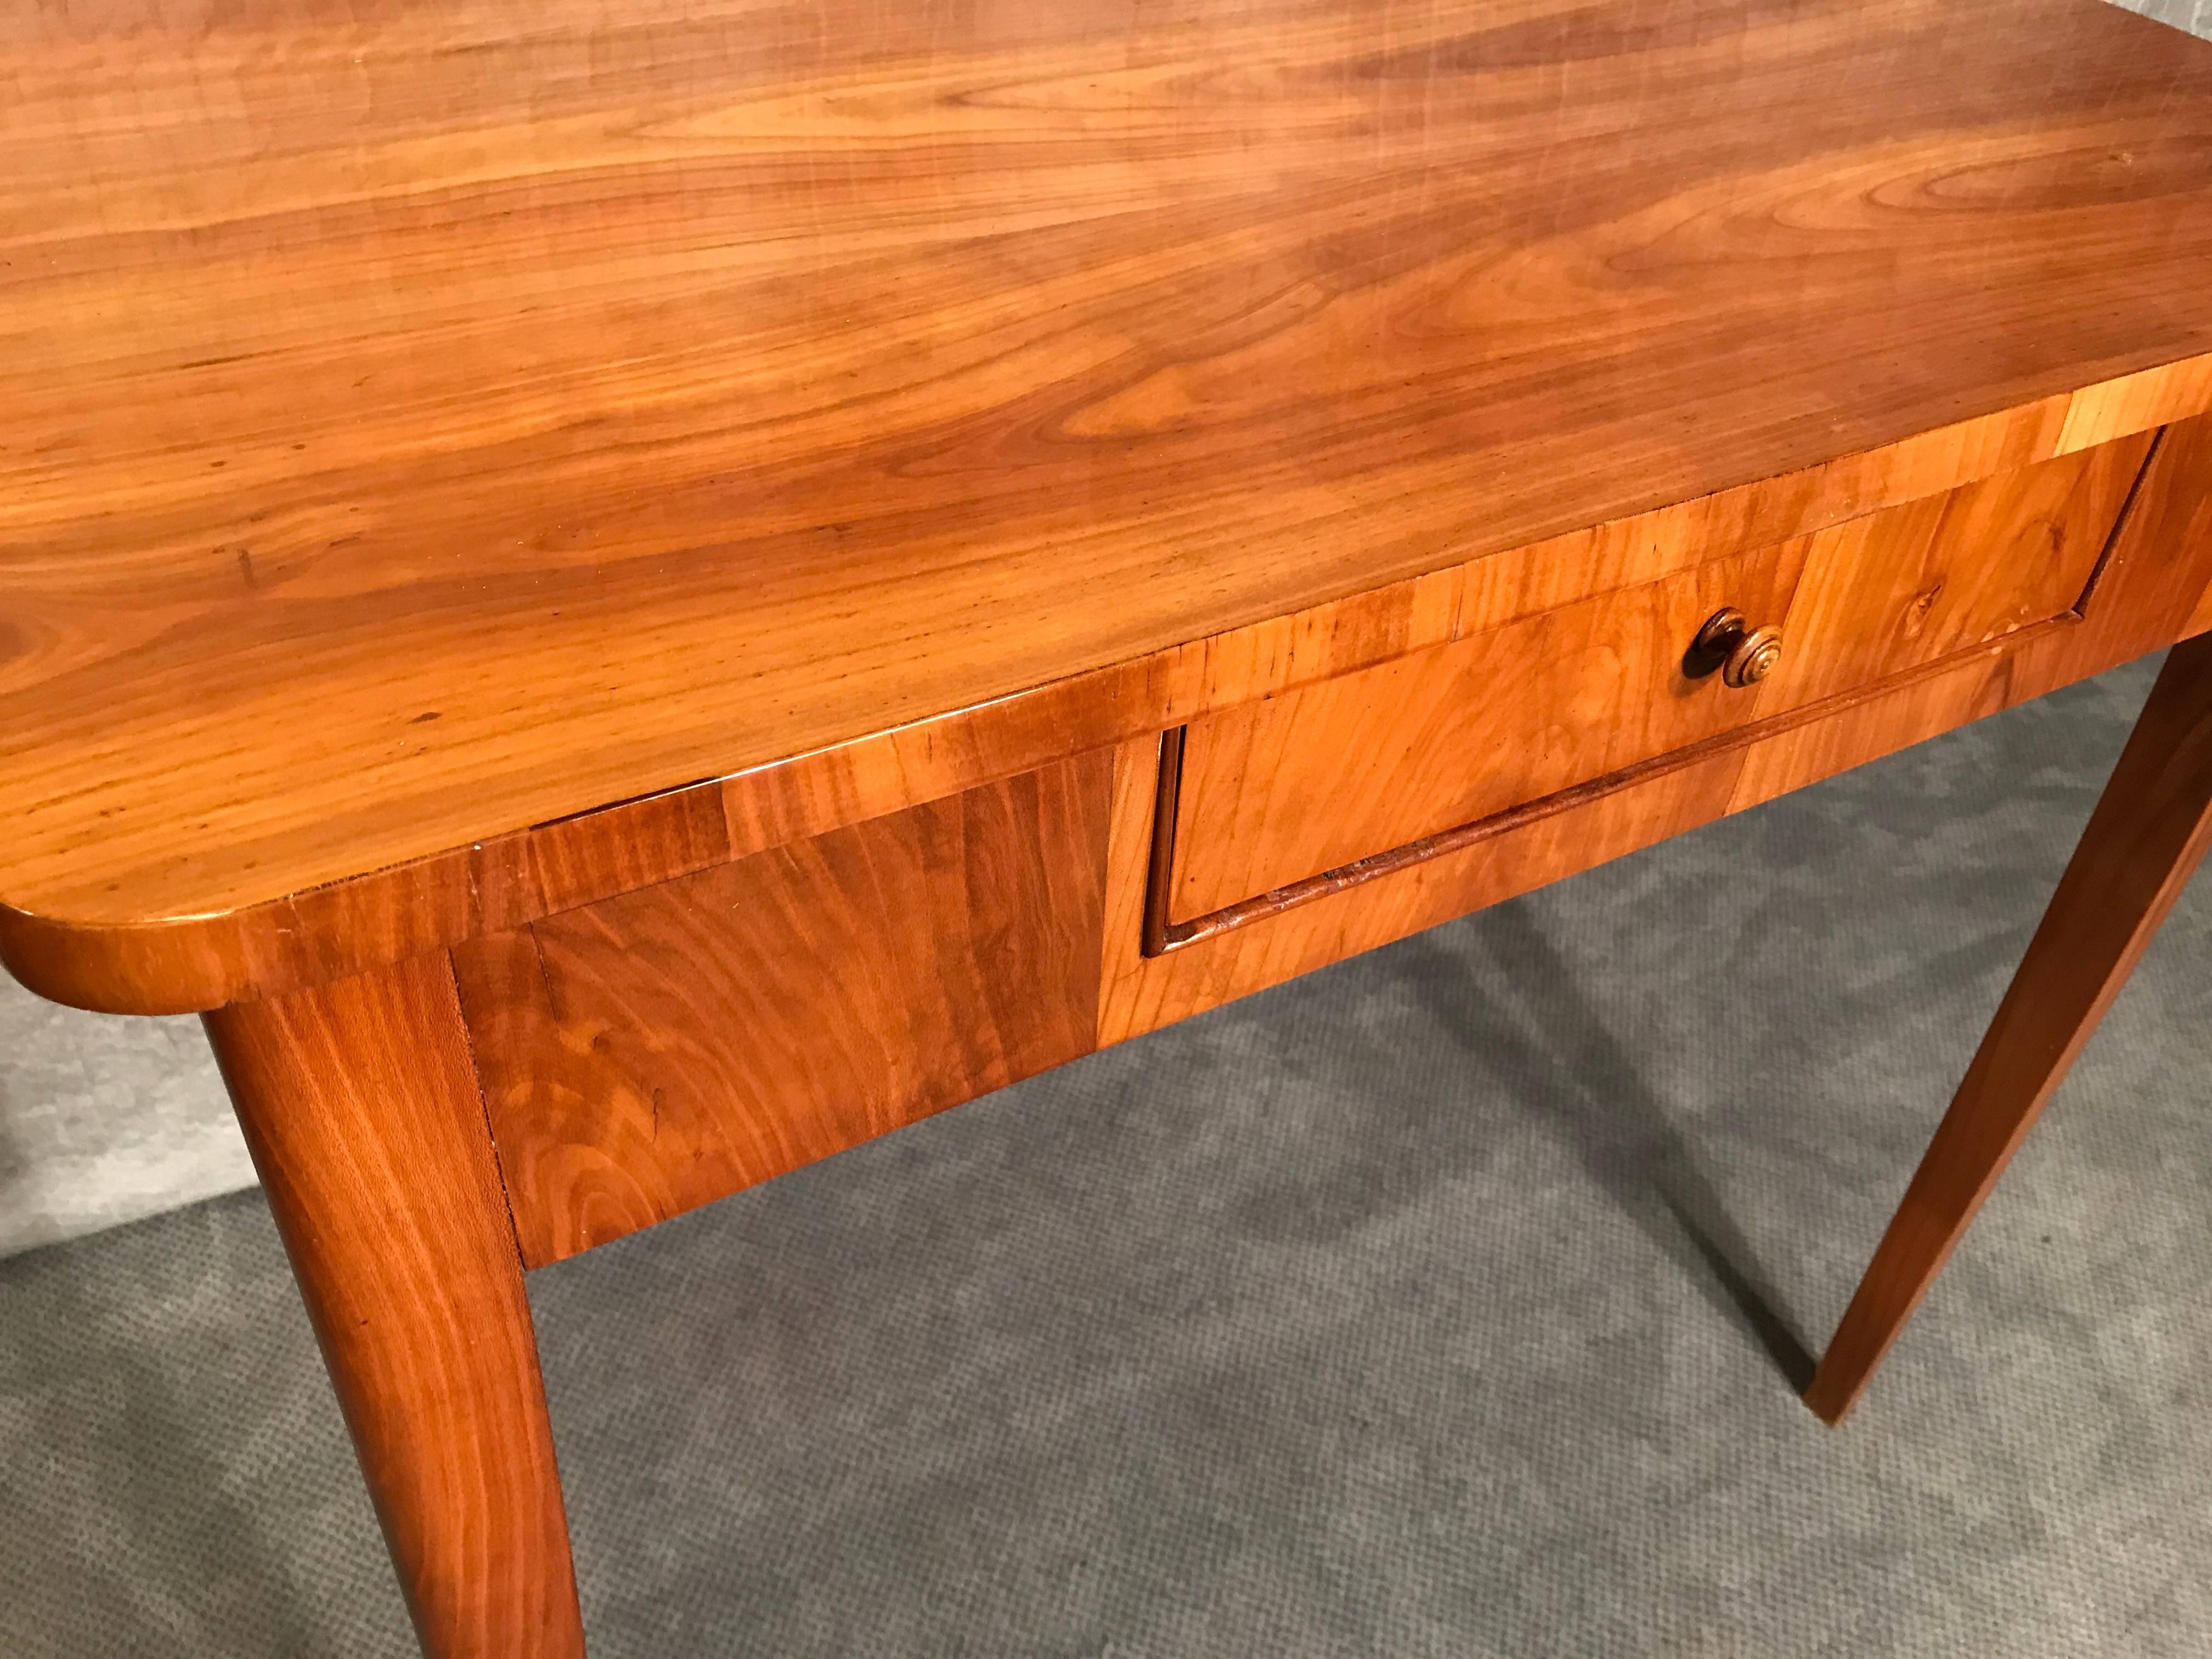 Small Biedermeier desk or side table, Germany 1820,
The desk has a beautiful cherry veneer. It has one drawer in the front. 
You do not need to put it against a wall because the back has the same cherry veneer as the front. It is the perfect little